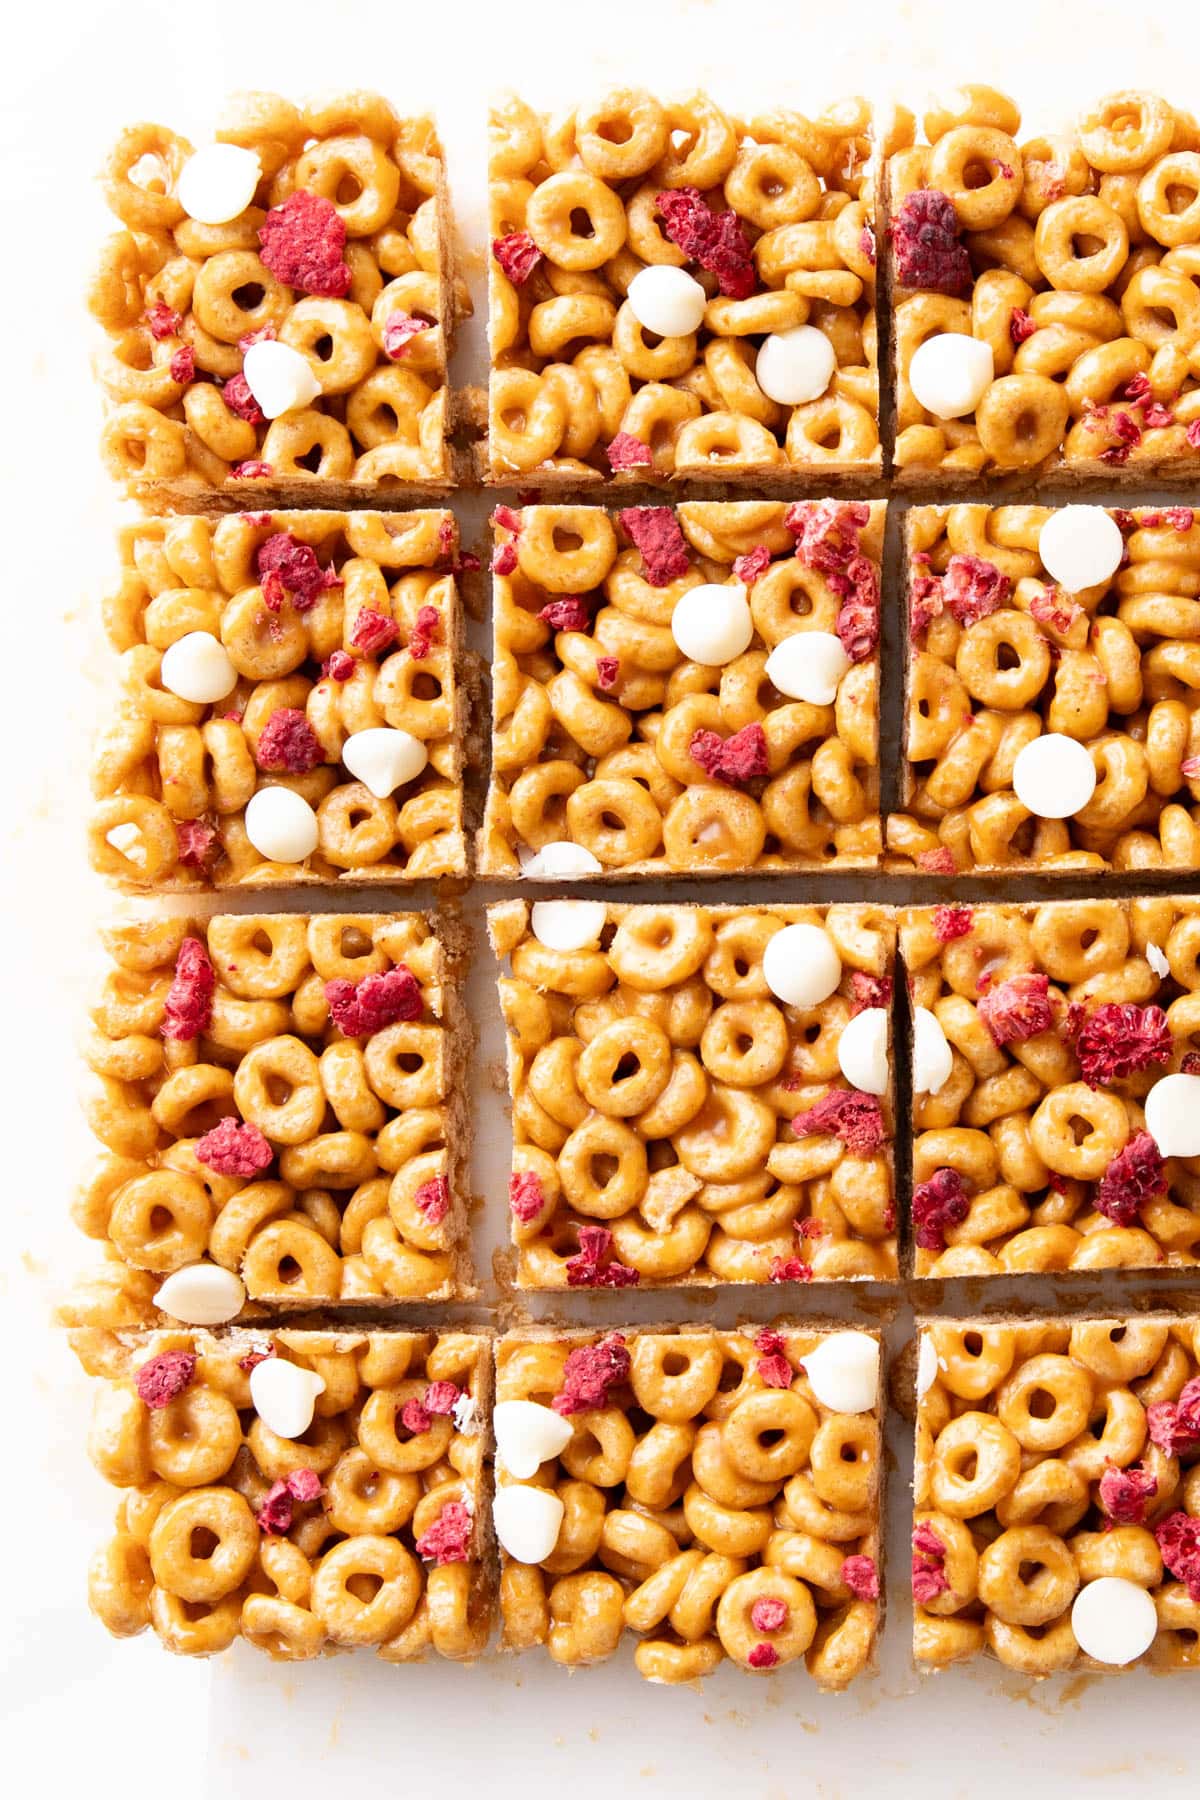 Rows of cereal bars featuring Cheerios topped with dried fruit and chocolate chips